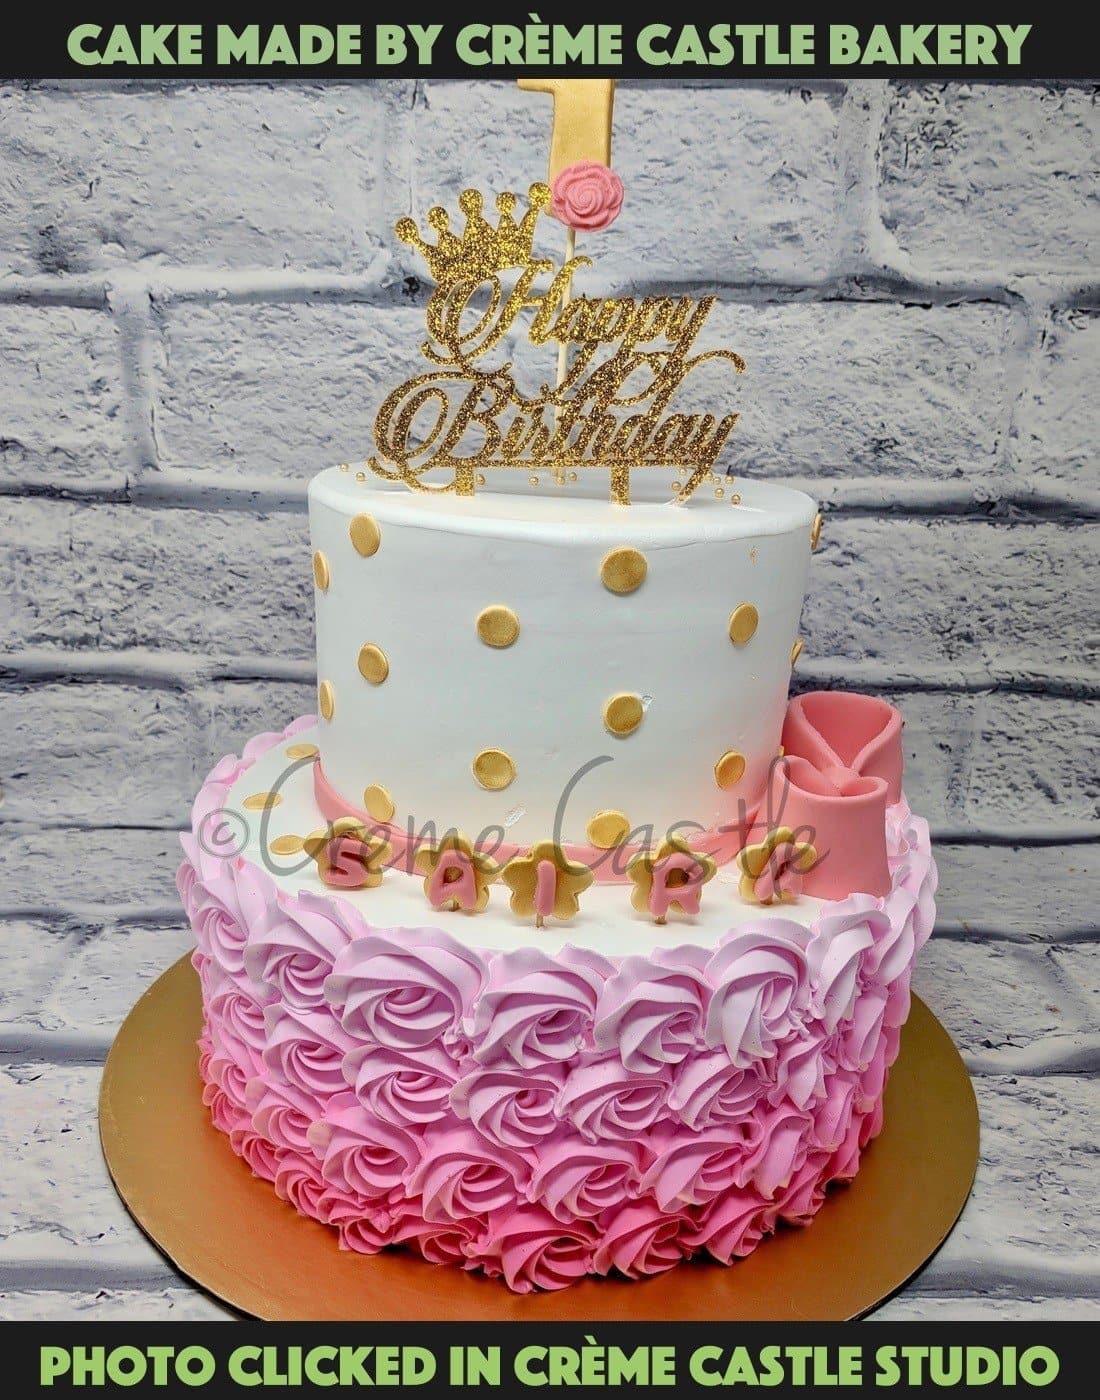 File:Pink coloured square cake in birthday.jpg - Wikimedia Commons